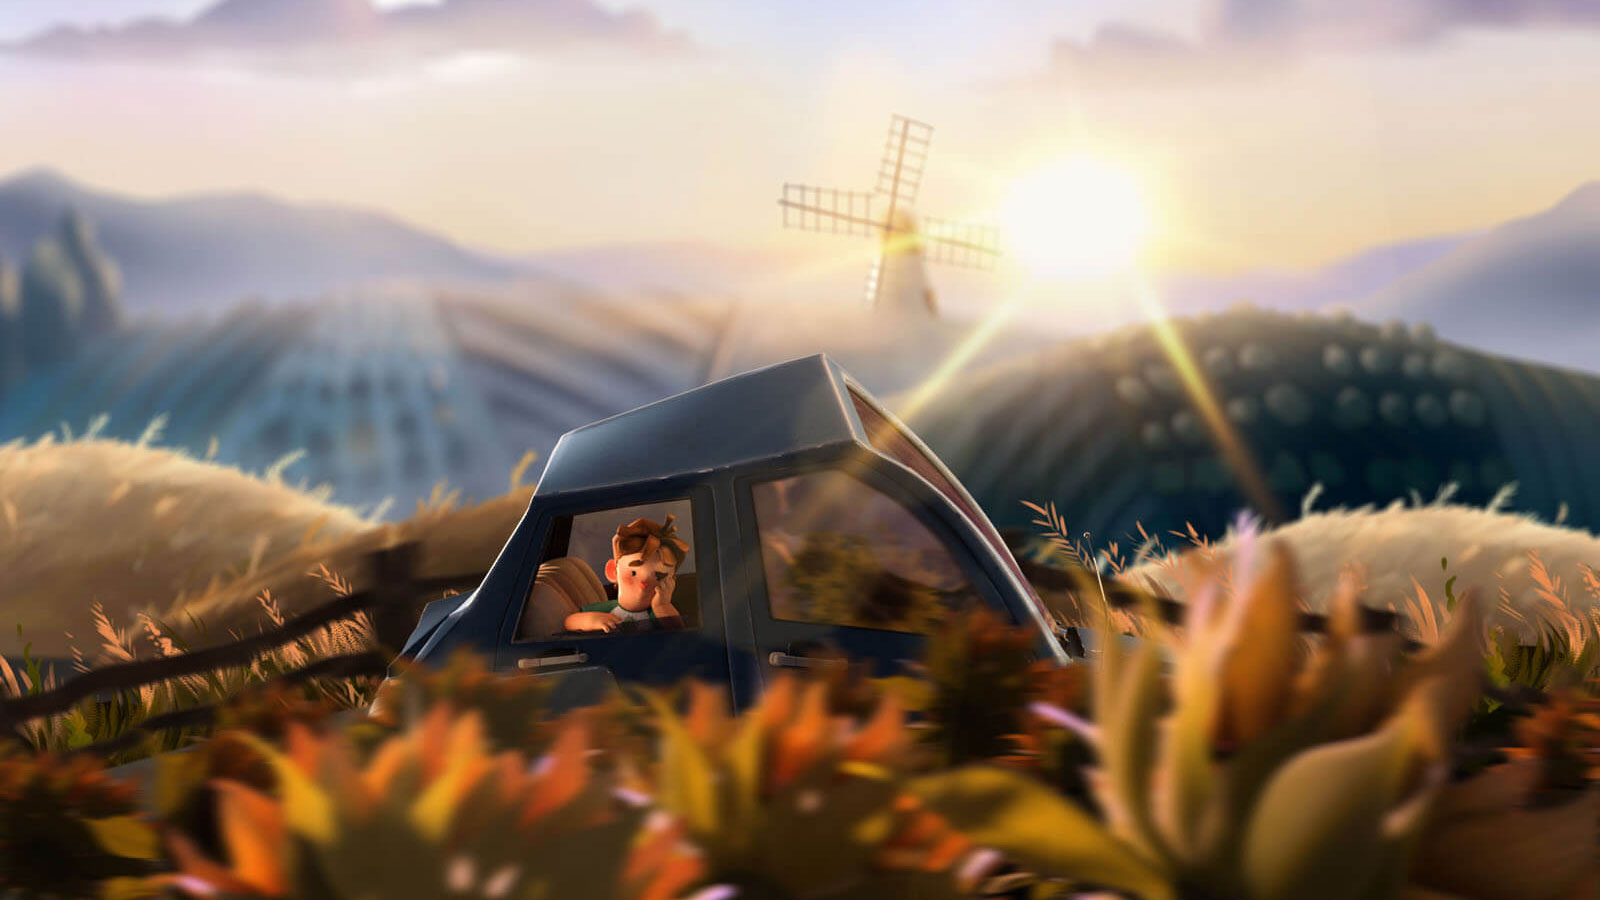 A bored boy looks out the window of a car that&#039;s passing through a series of hills with a windmill in the background